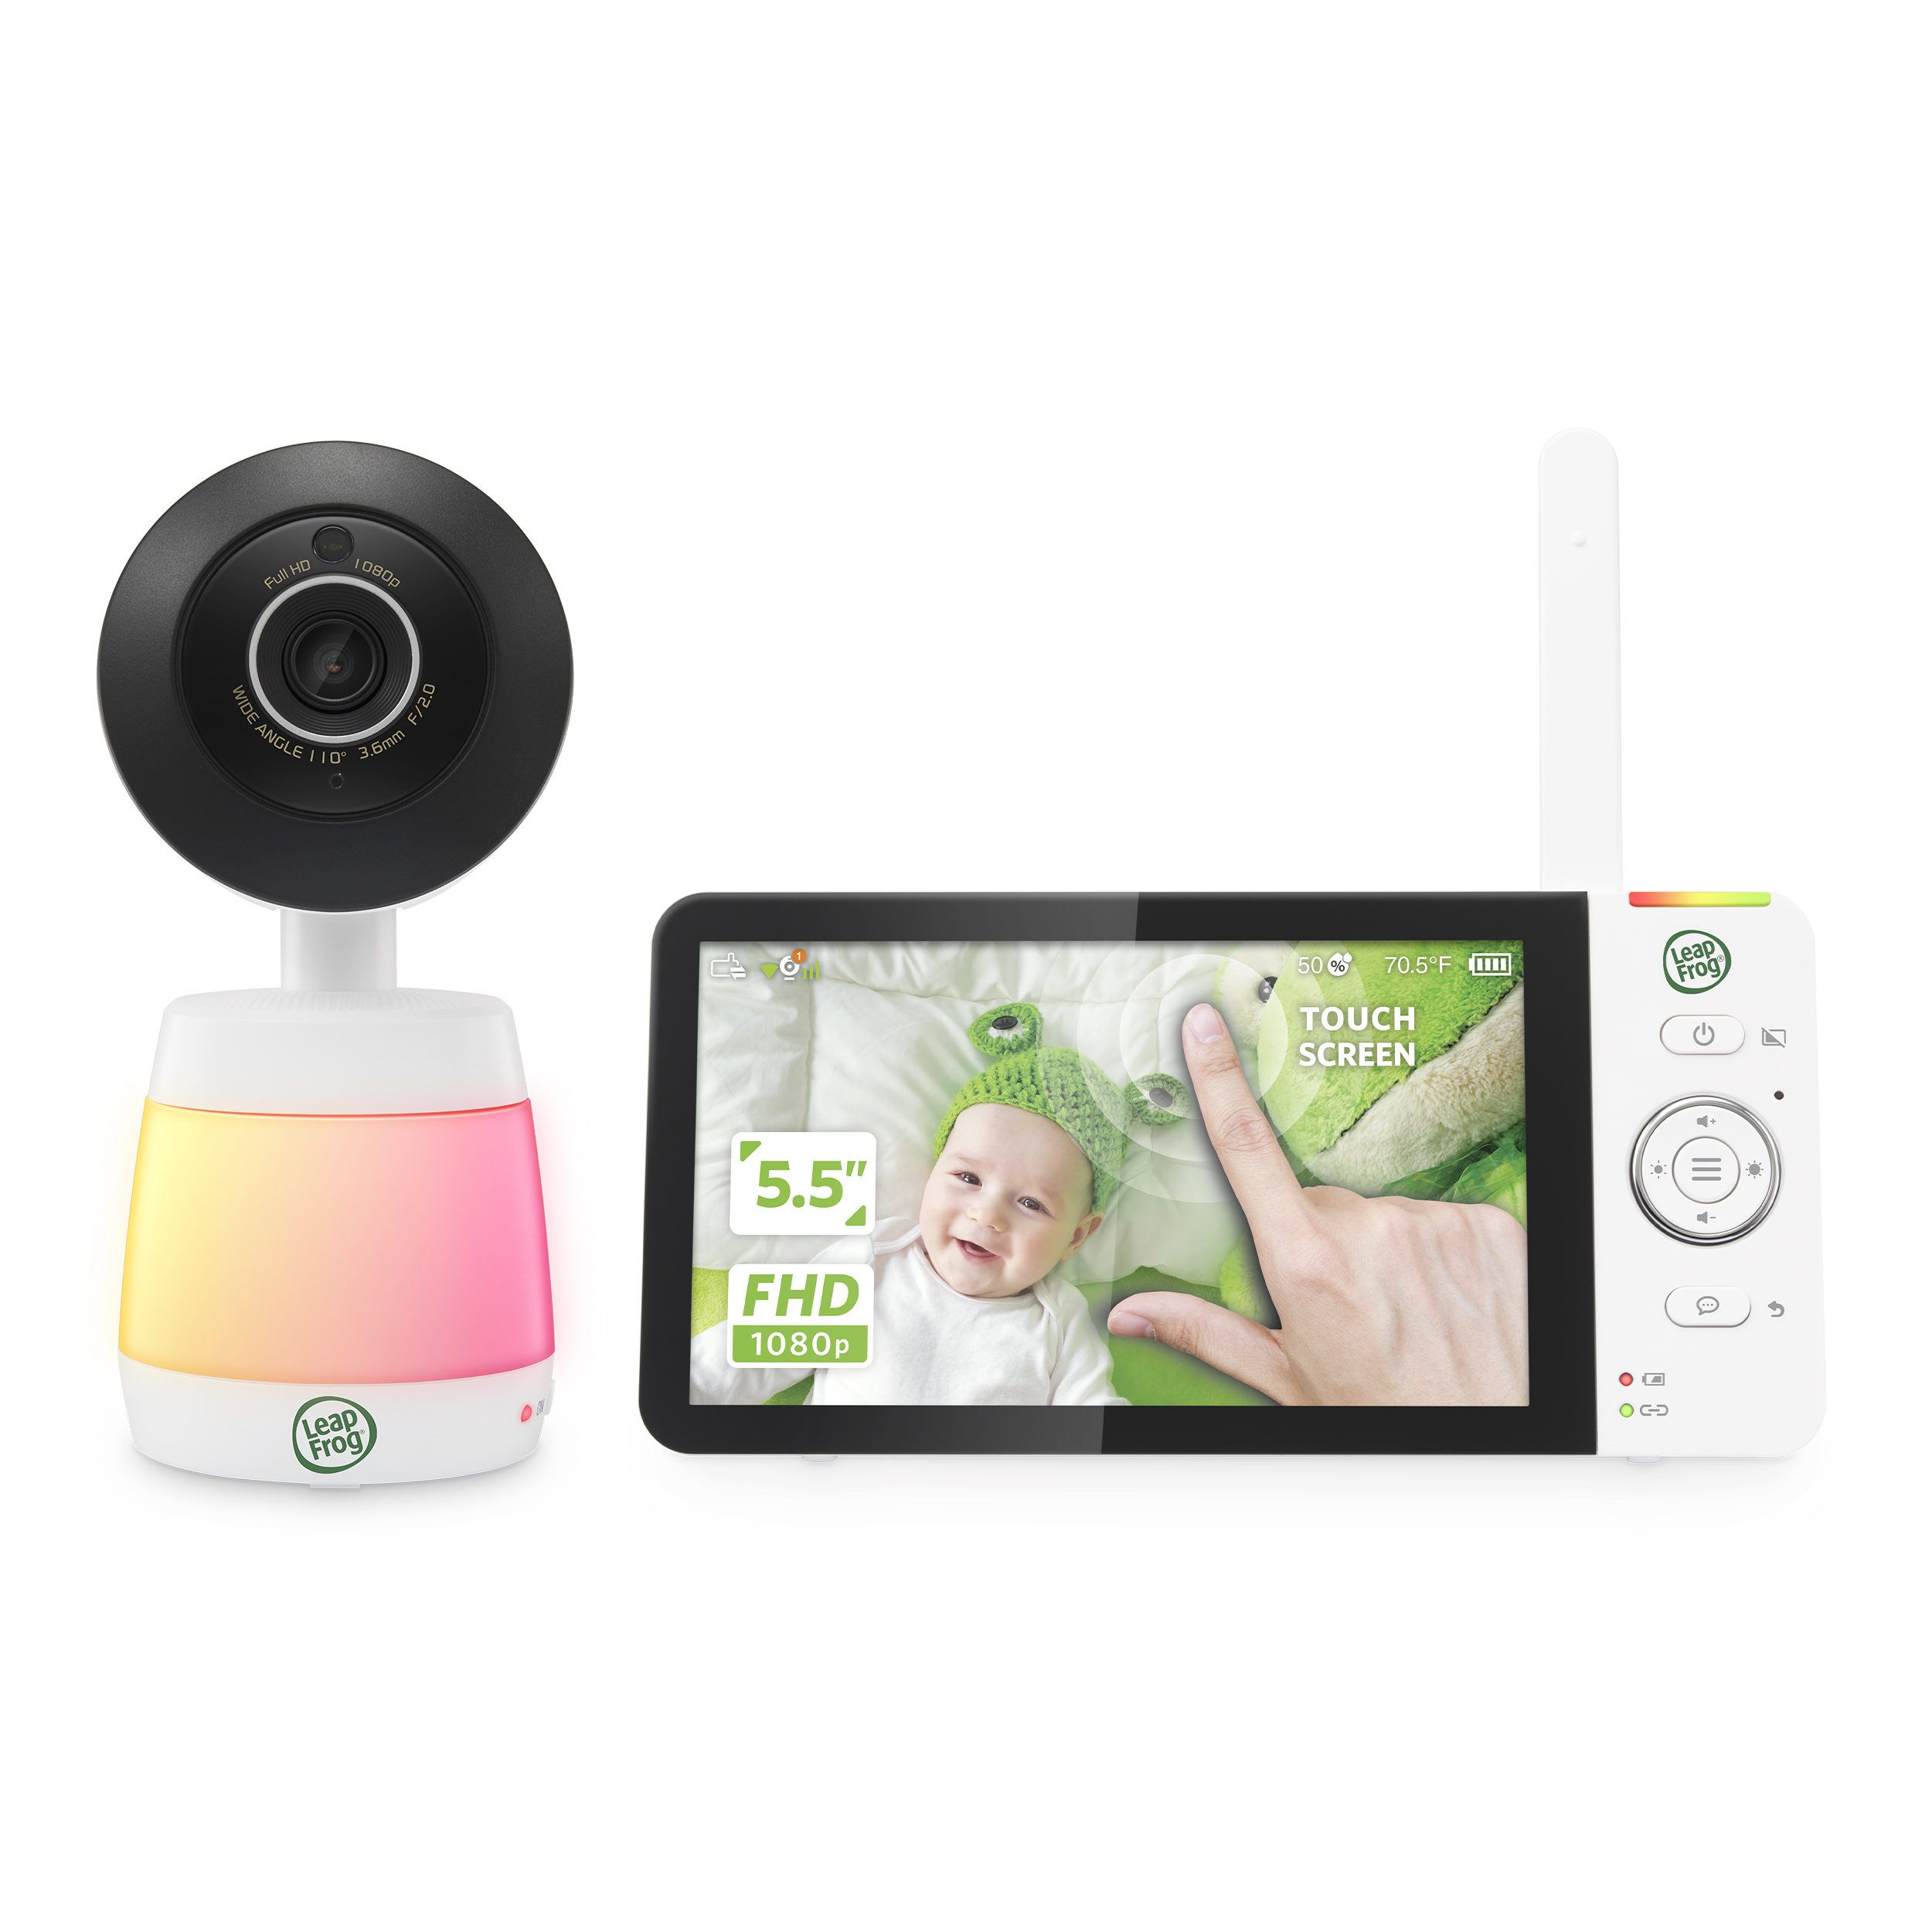 LeapFrog Remote Access 1080p Touch Screen 5.5″ Baby Monitor